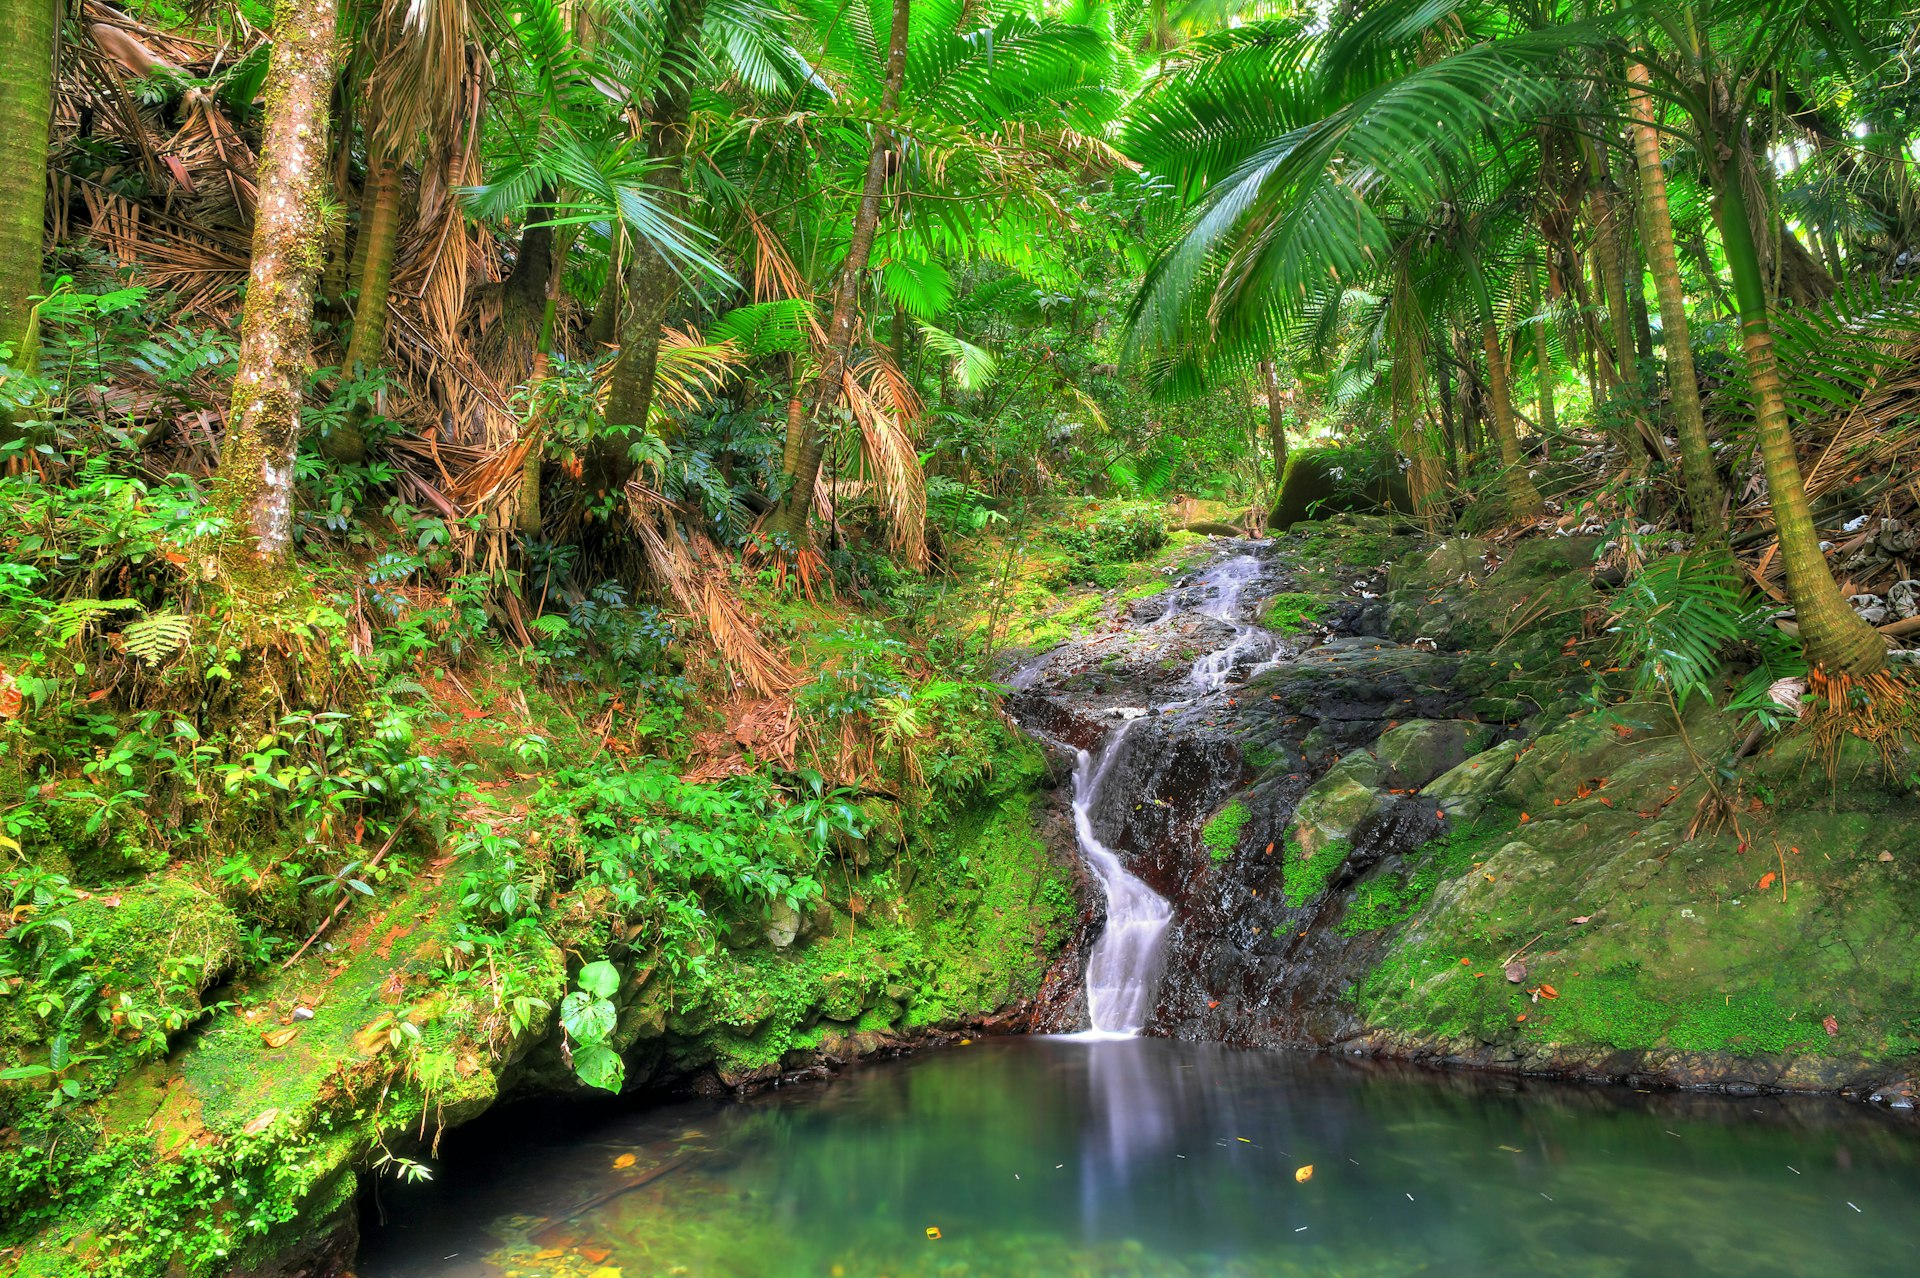 A small cascade pools into a small pond in El Yunque national forest, Puerto Rico